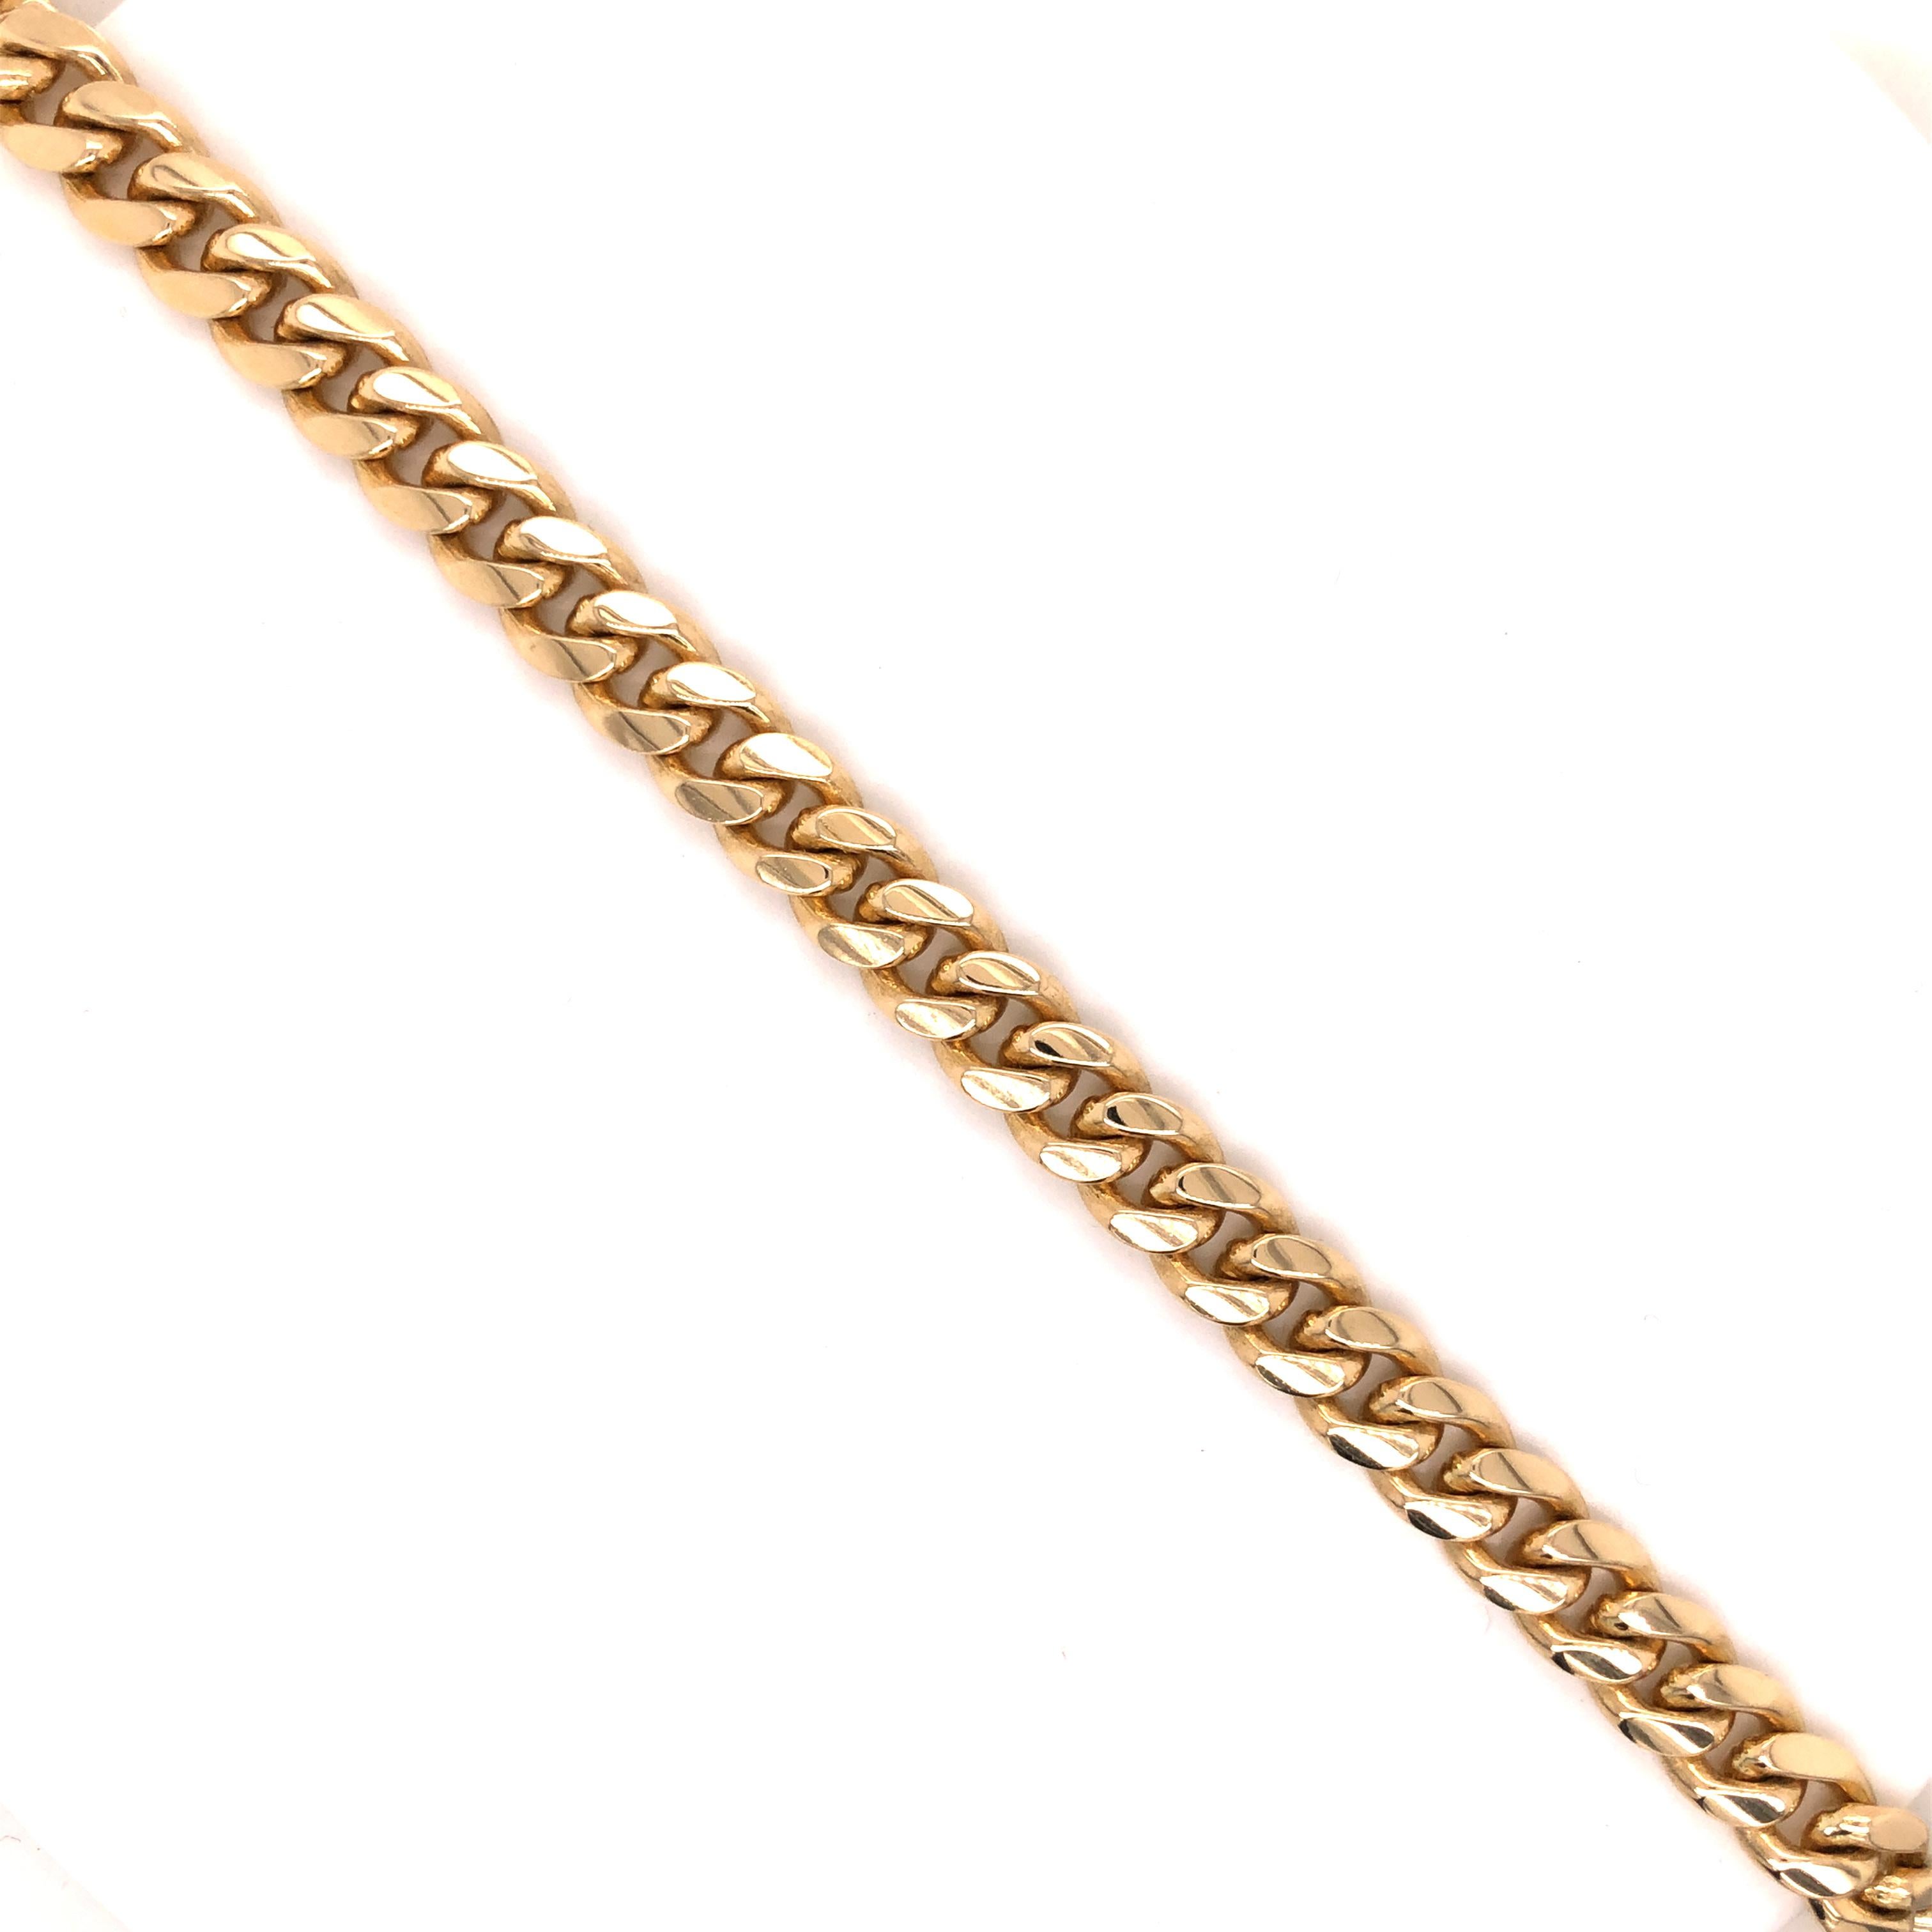 A Solid 14K Yellow Gold 8.5 mm Cuban Link Bracelet

Metal: 14K Yellow Gold

Size: 8